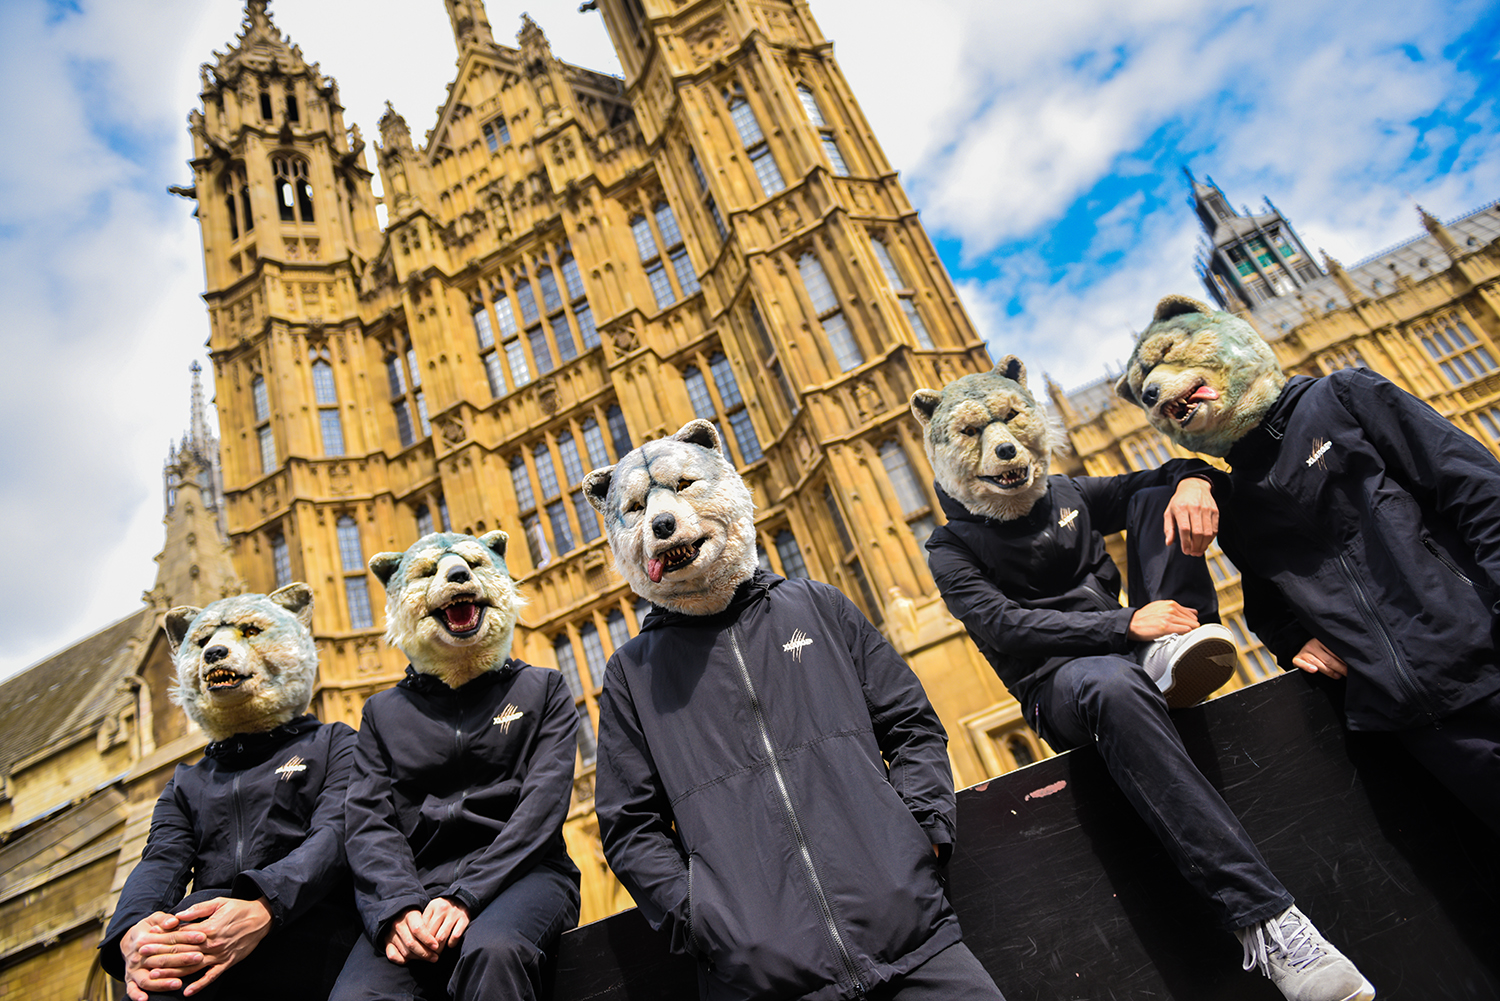 Man With A Mission New Single Raise Your Flag 先行体験 Special High Resolution Experience Mission ソニー株式会社のプレスリリース